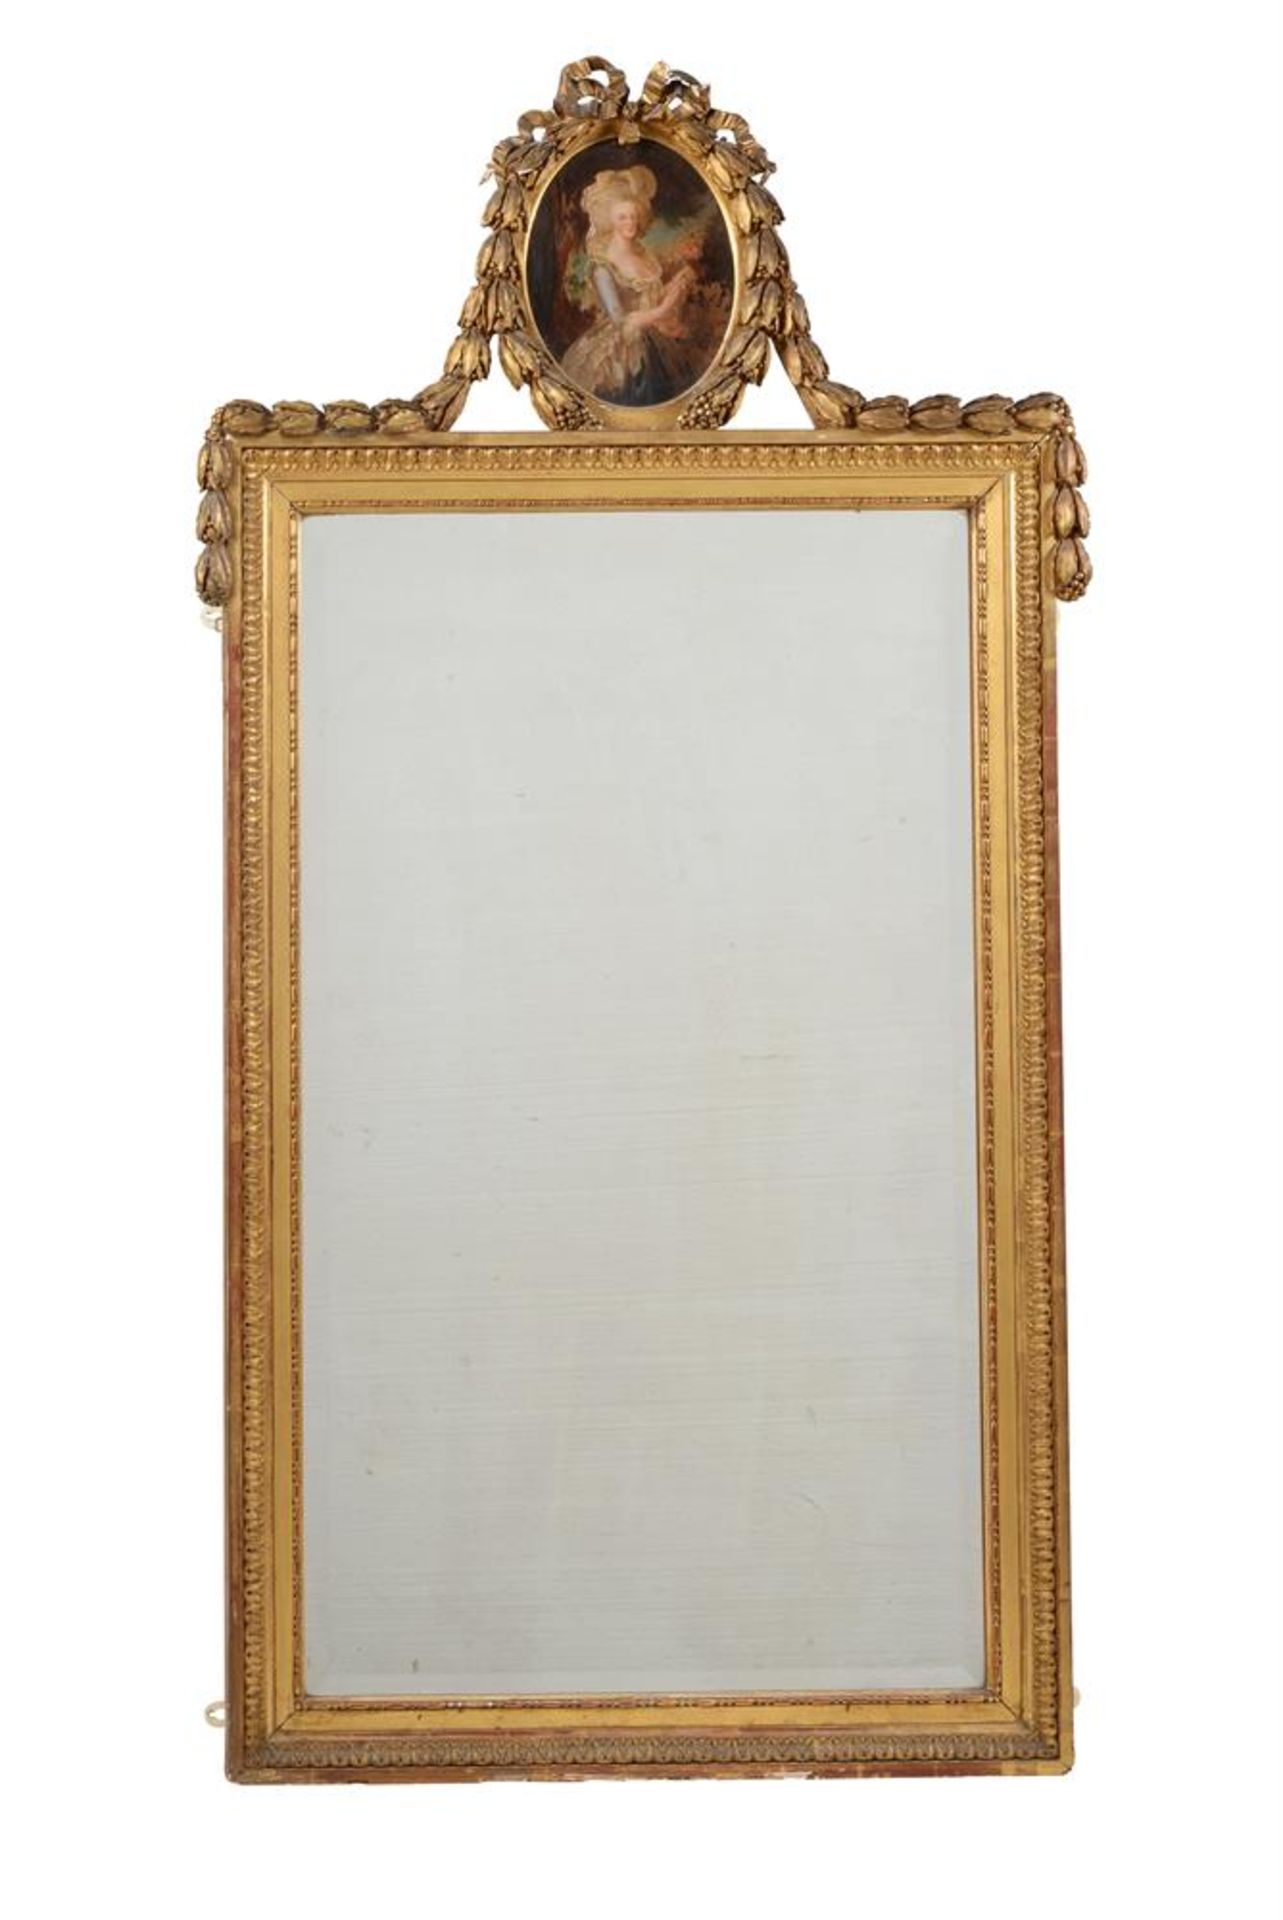 A giltwood and composition wall mirror in late 18th century style